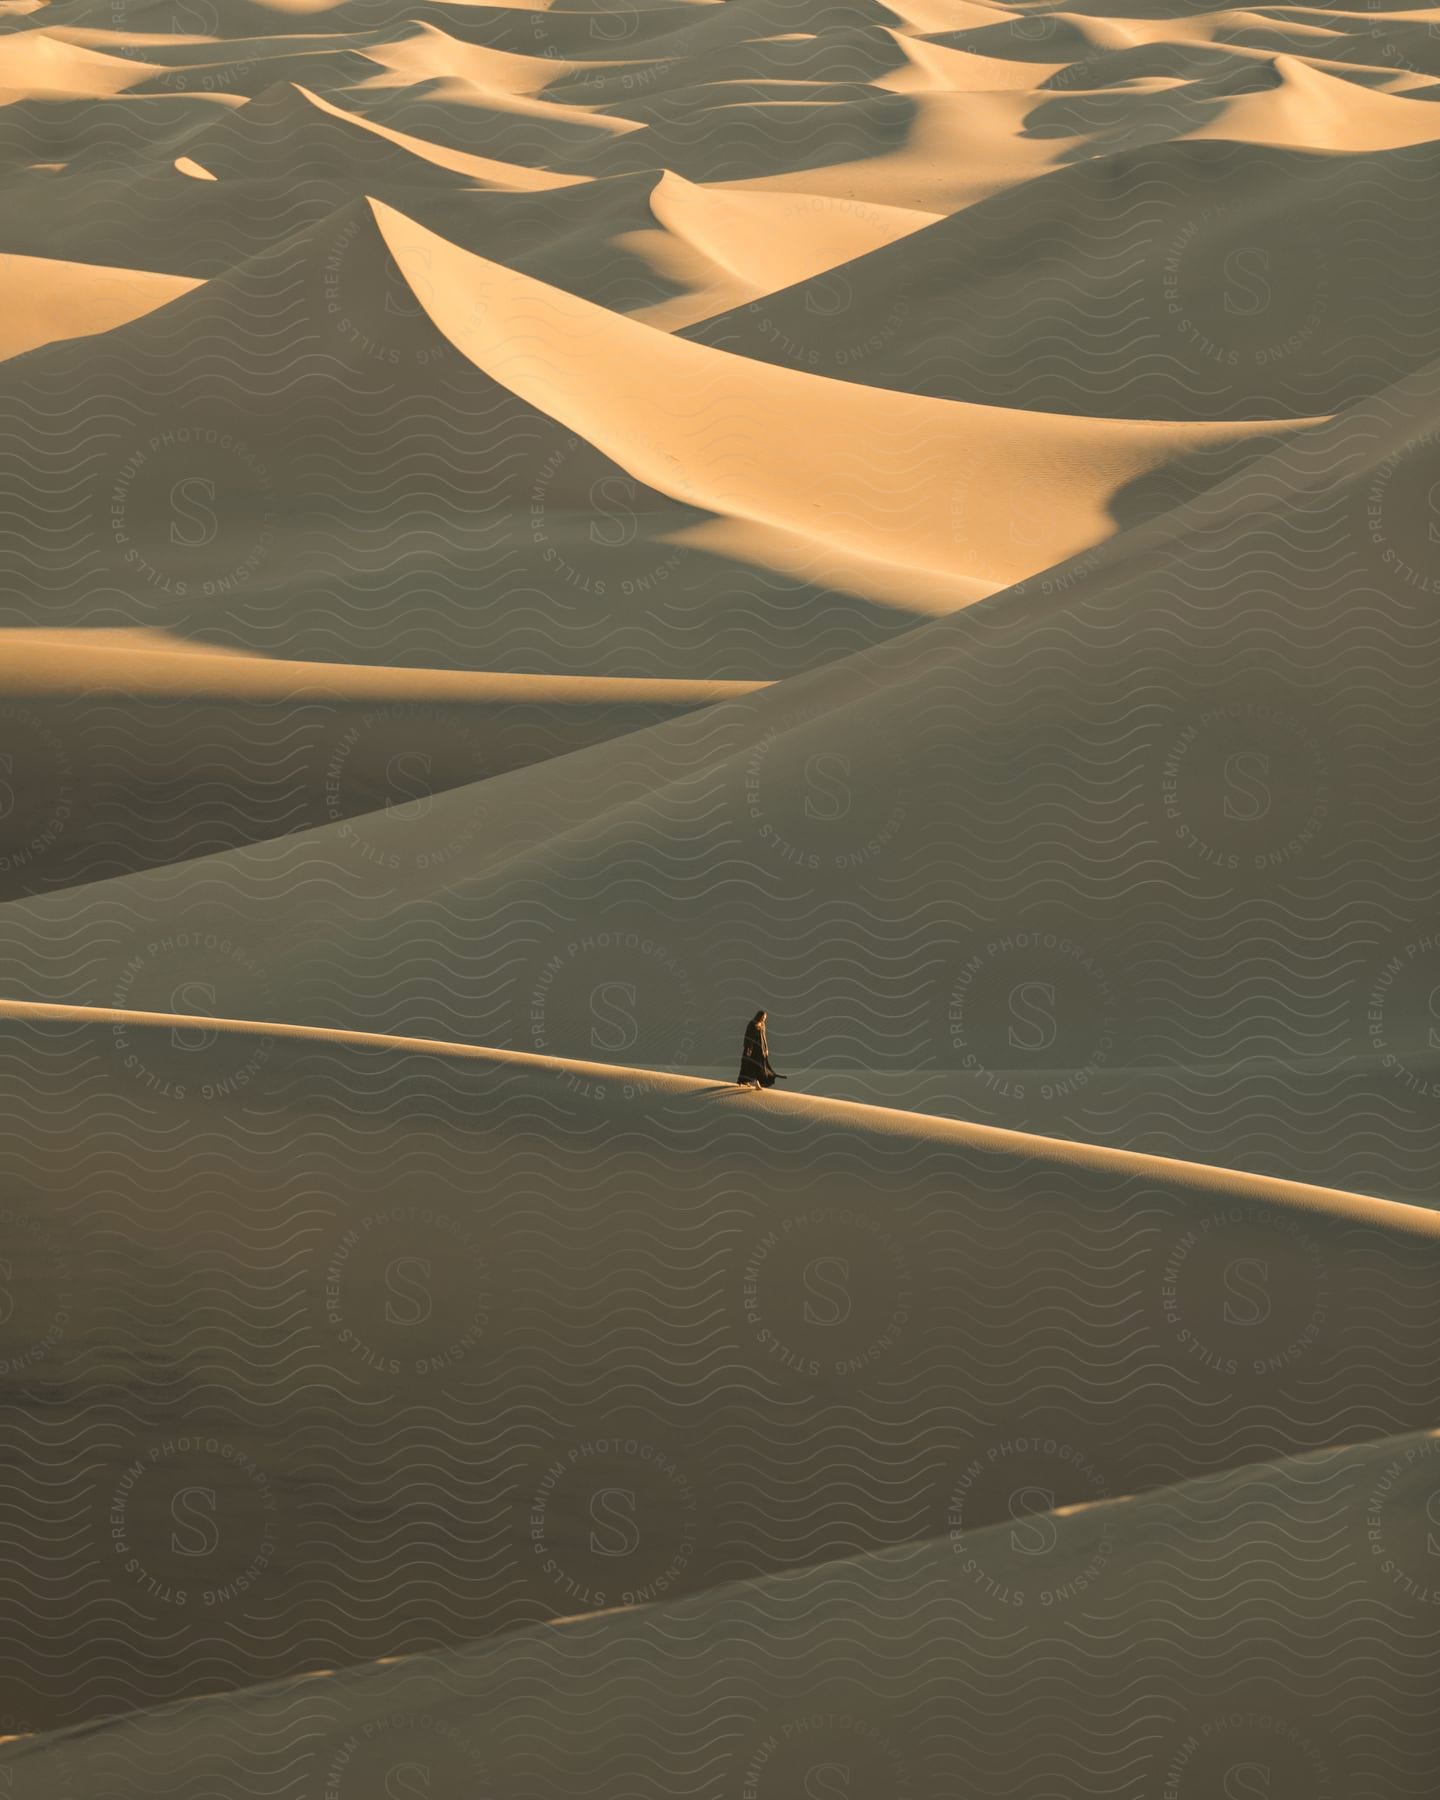 in the dry desert on a sunny day a person walks on the sand alone